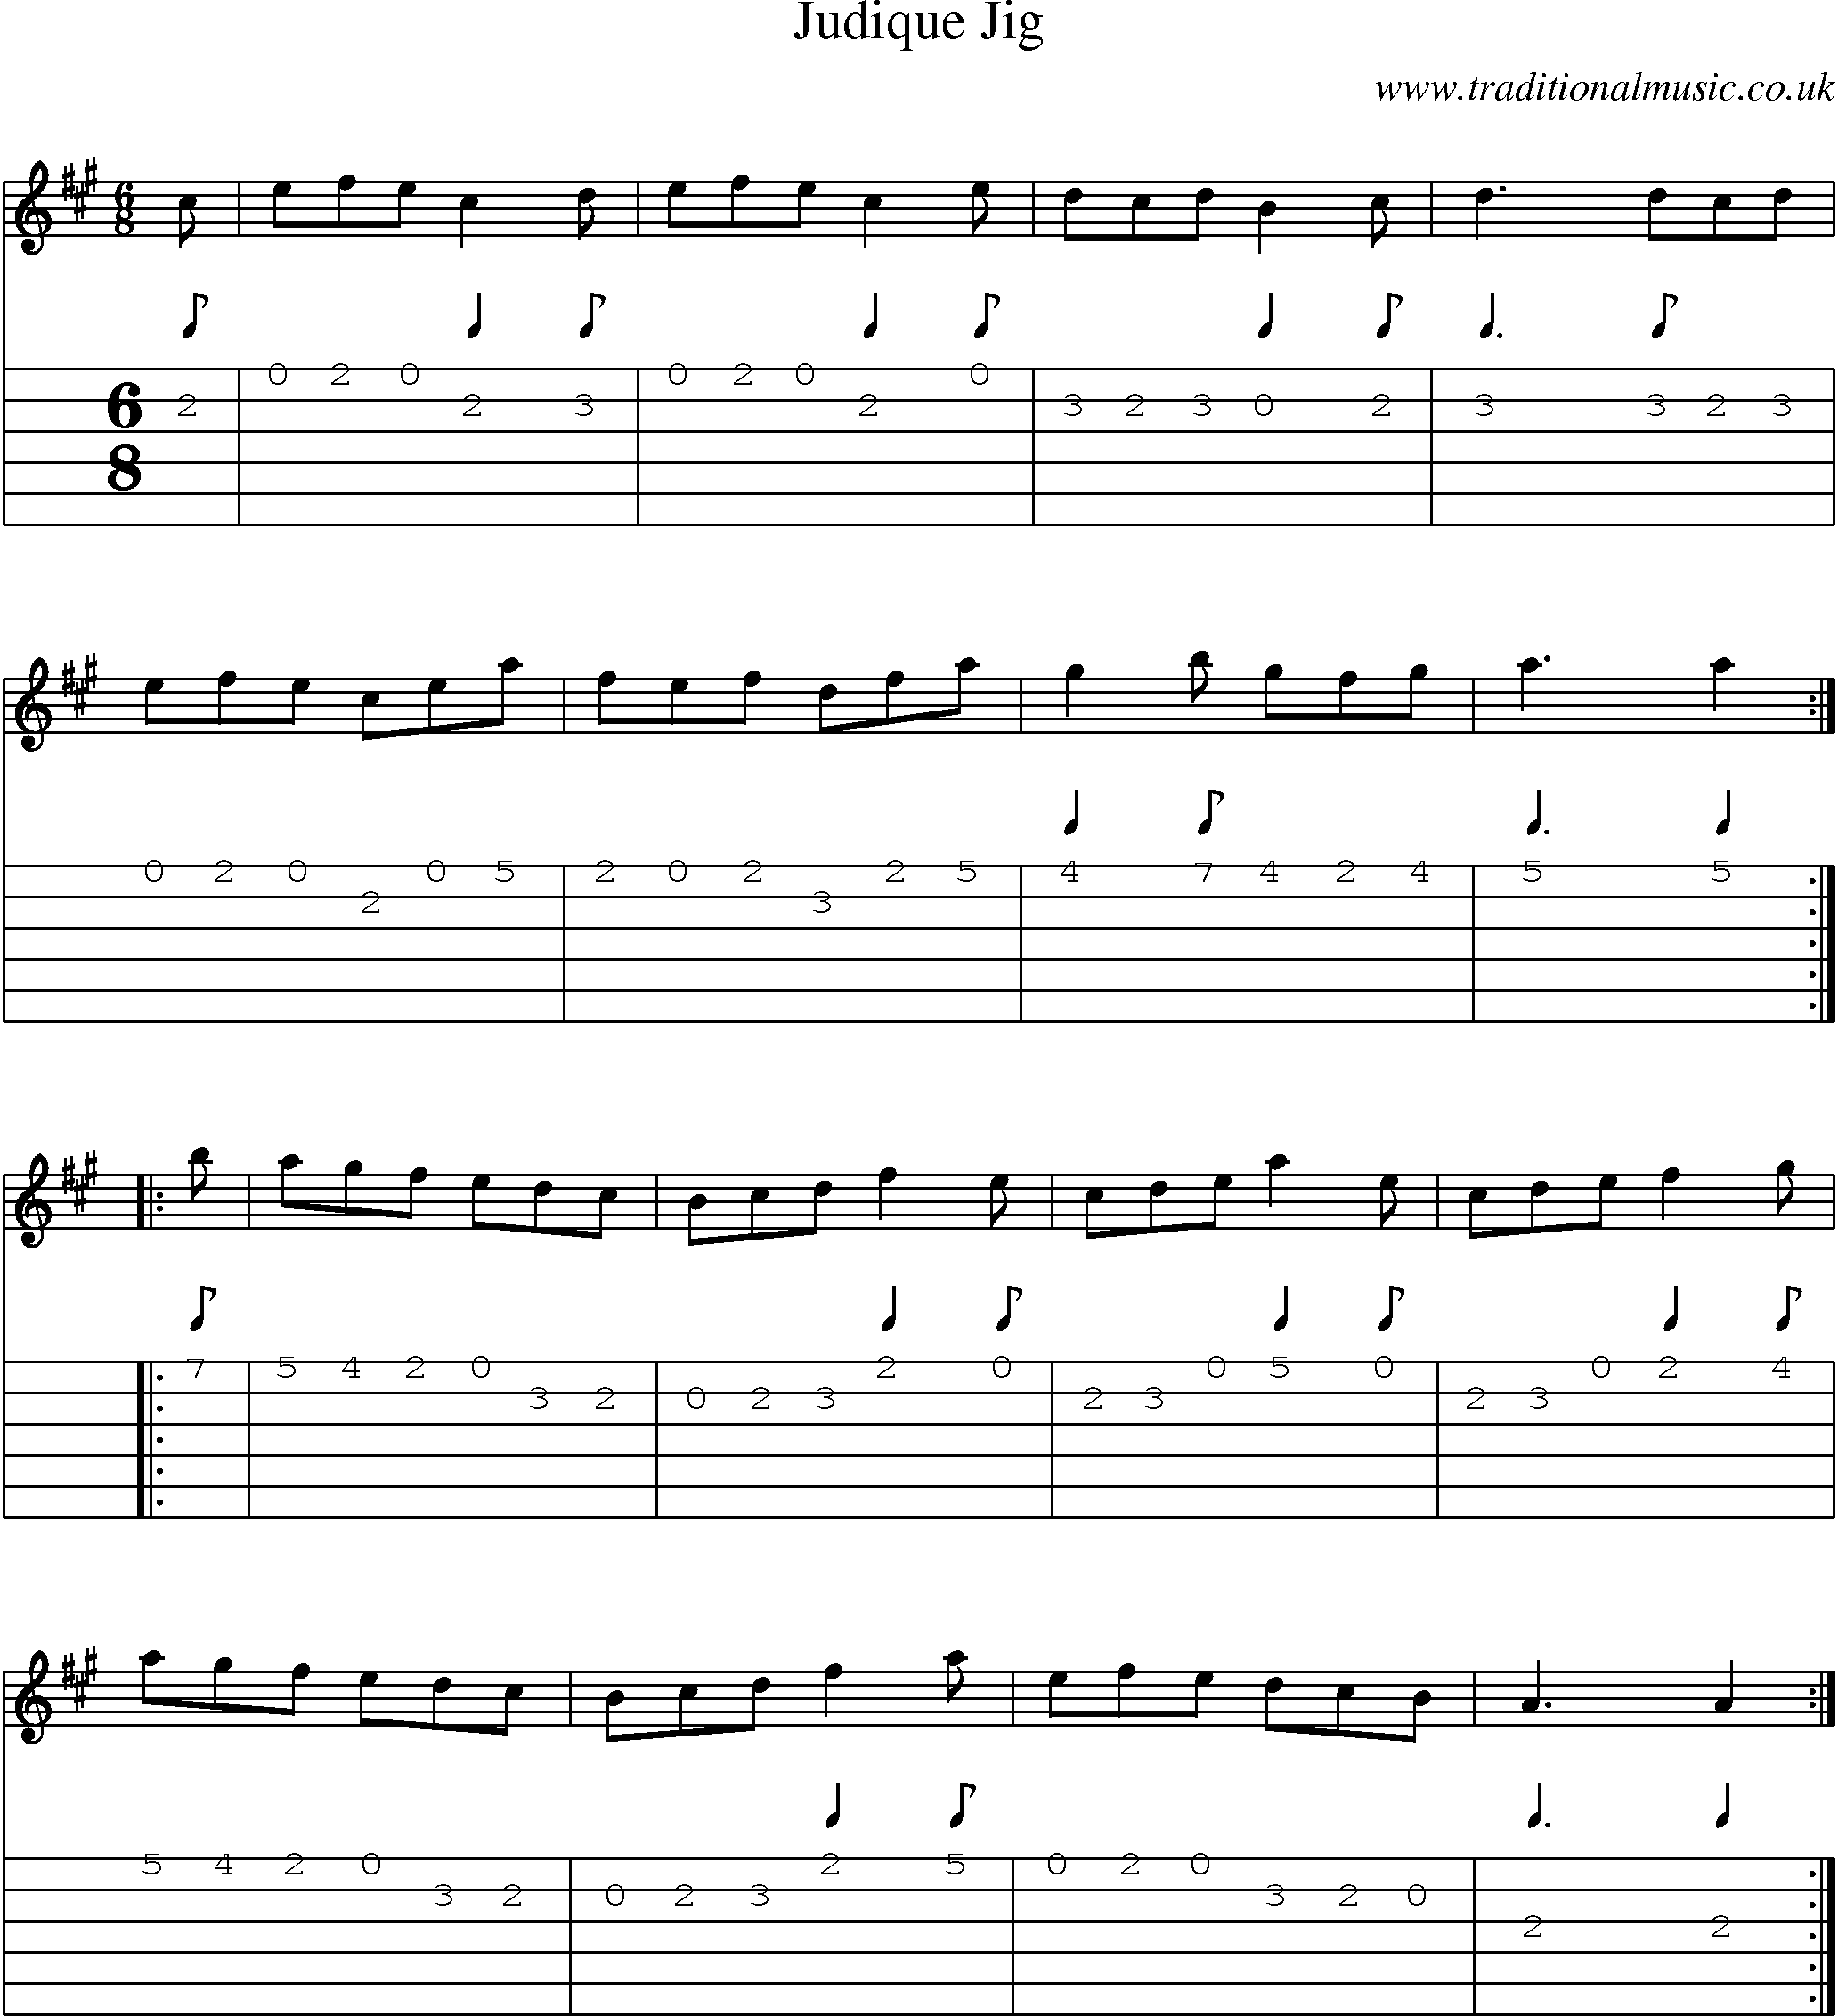 Music Score and Guitar Tabs for Judique Jig